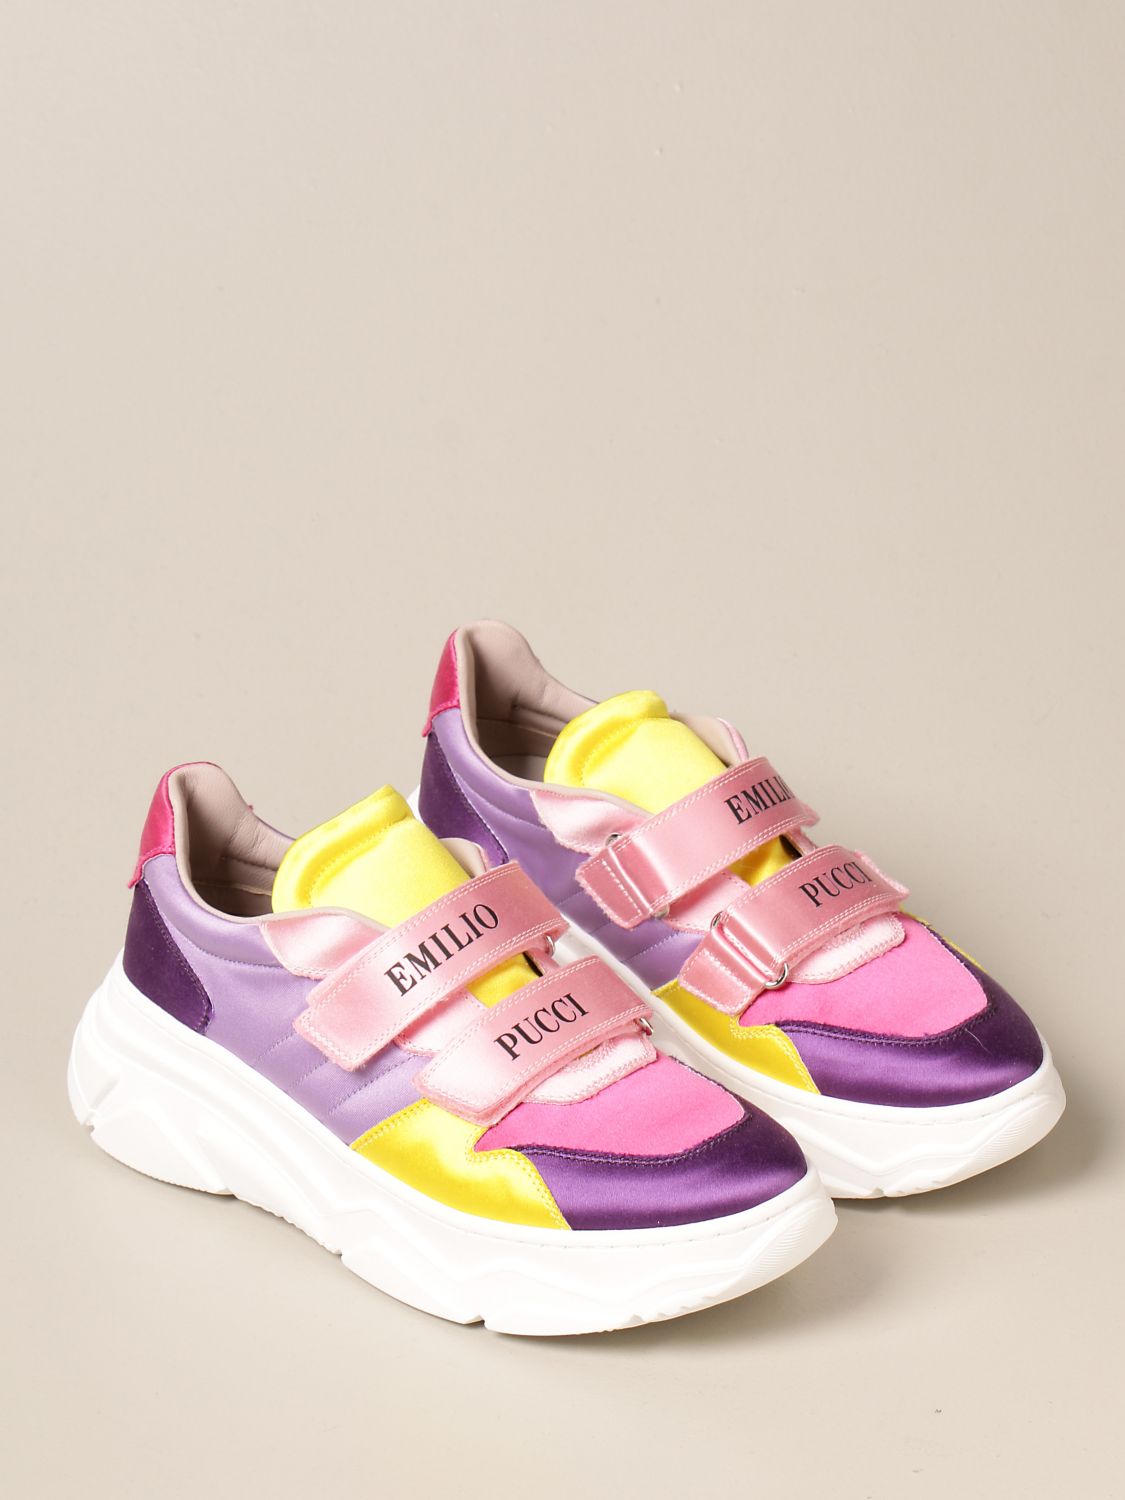 Emilio Pucci shoes for girls